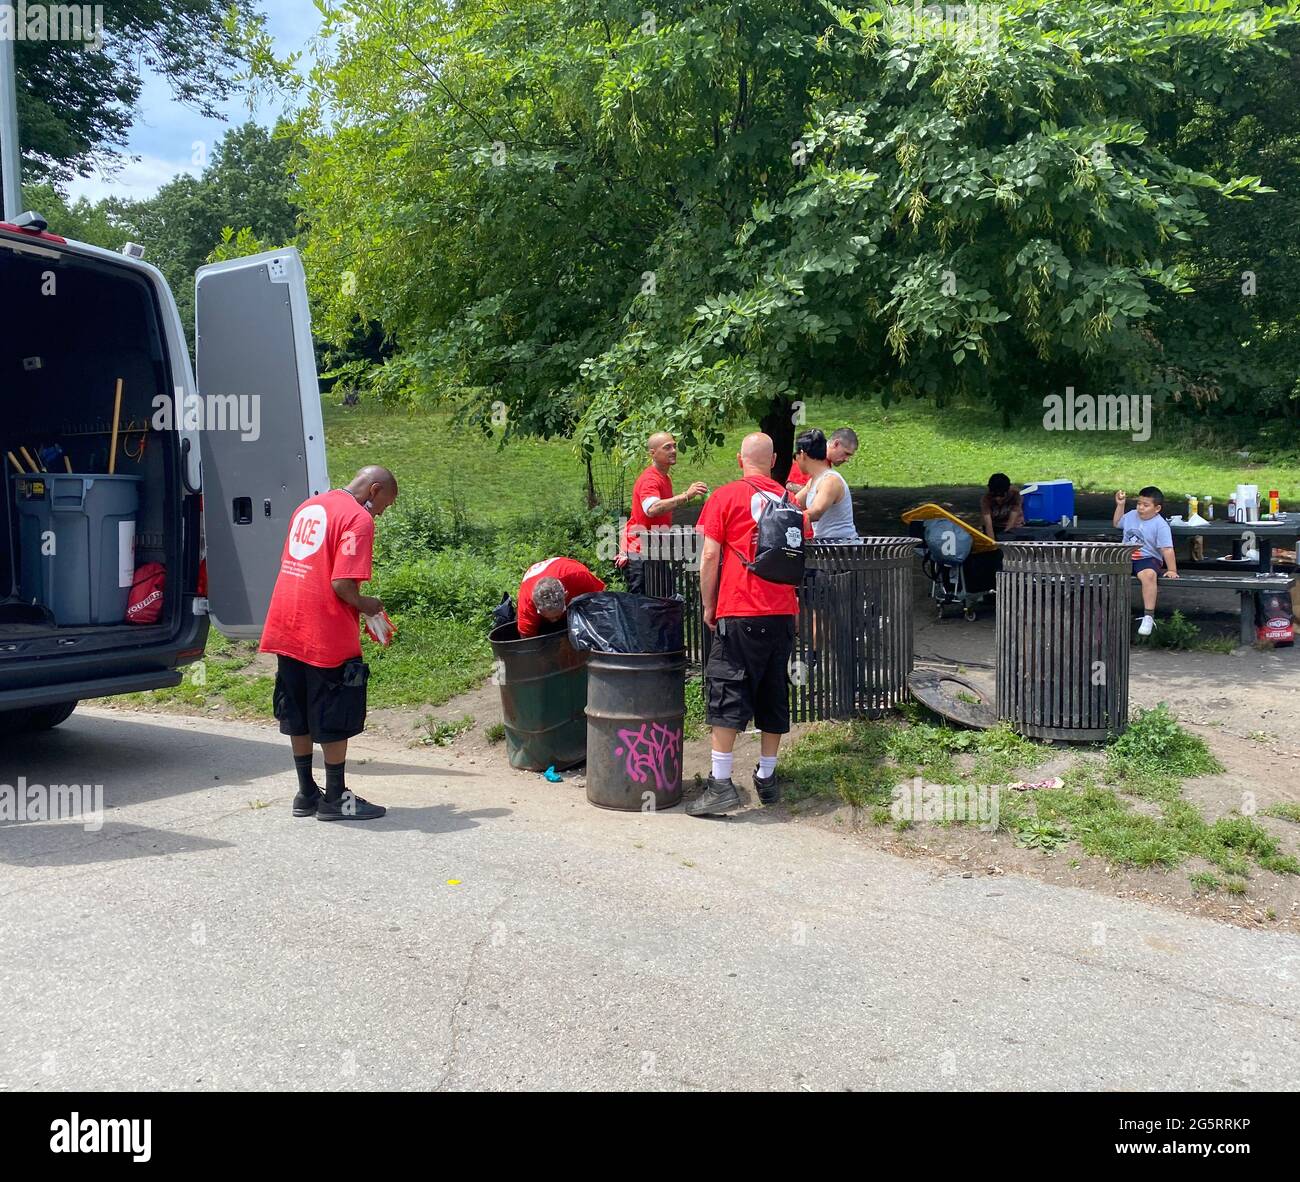 Association for Community Employment: ACE empowers New Yorkers experiencing homelessness through a comprehensive vocational rehabilitation and workforce development program. Homeless ACE members cleaning in Prospect Park in Brooklyn, NY. Stock Photo